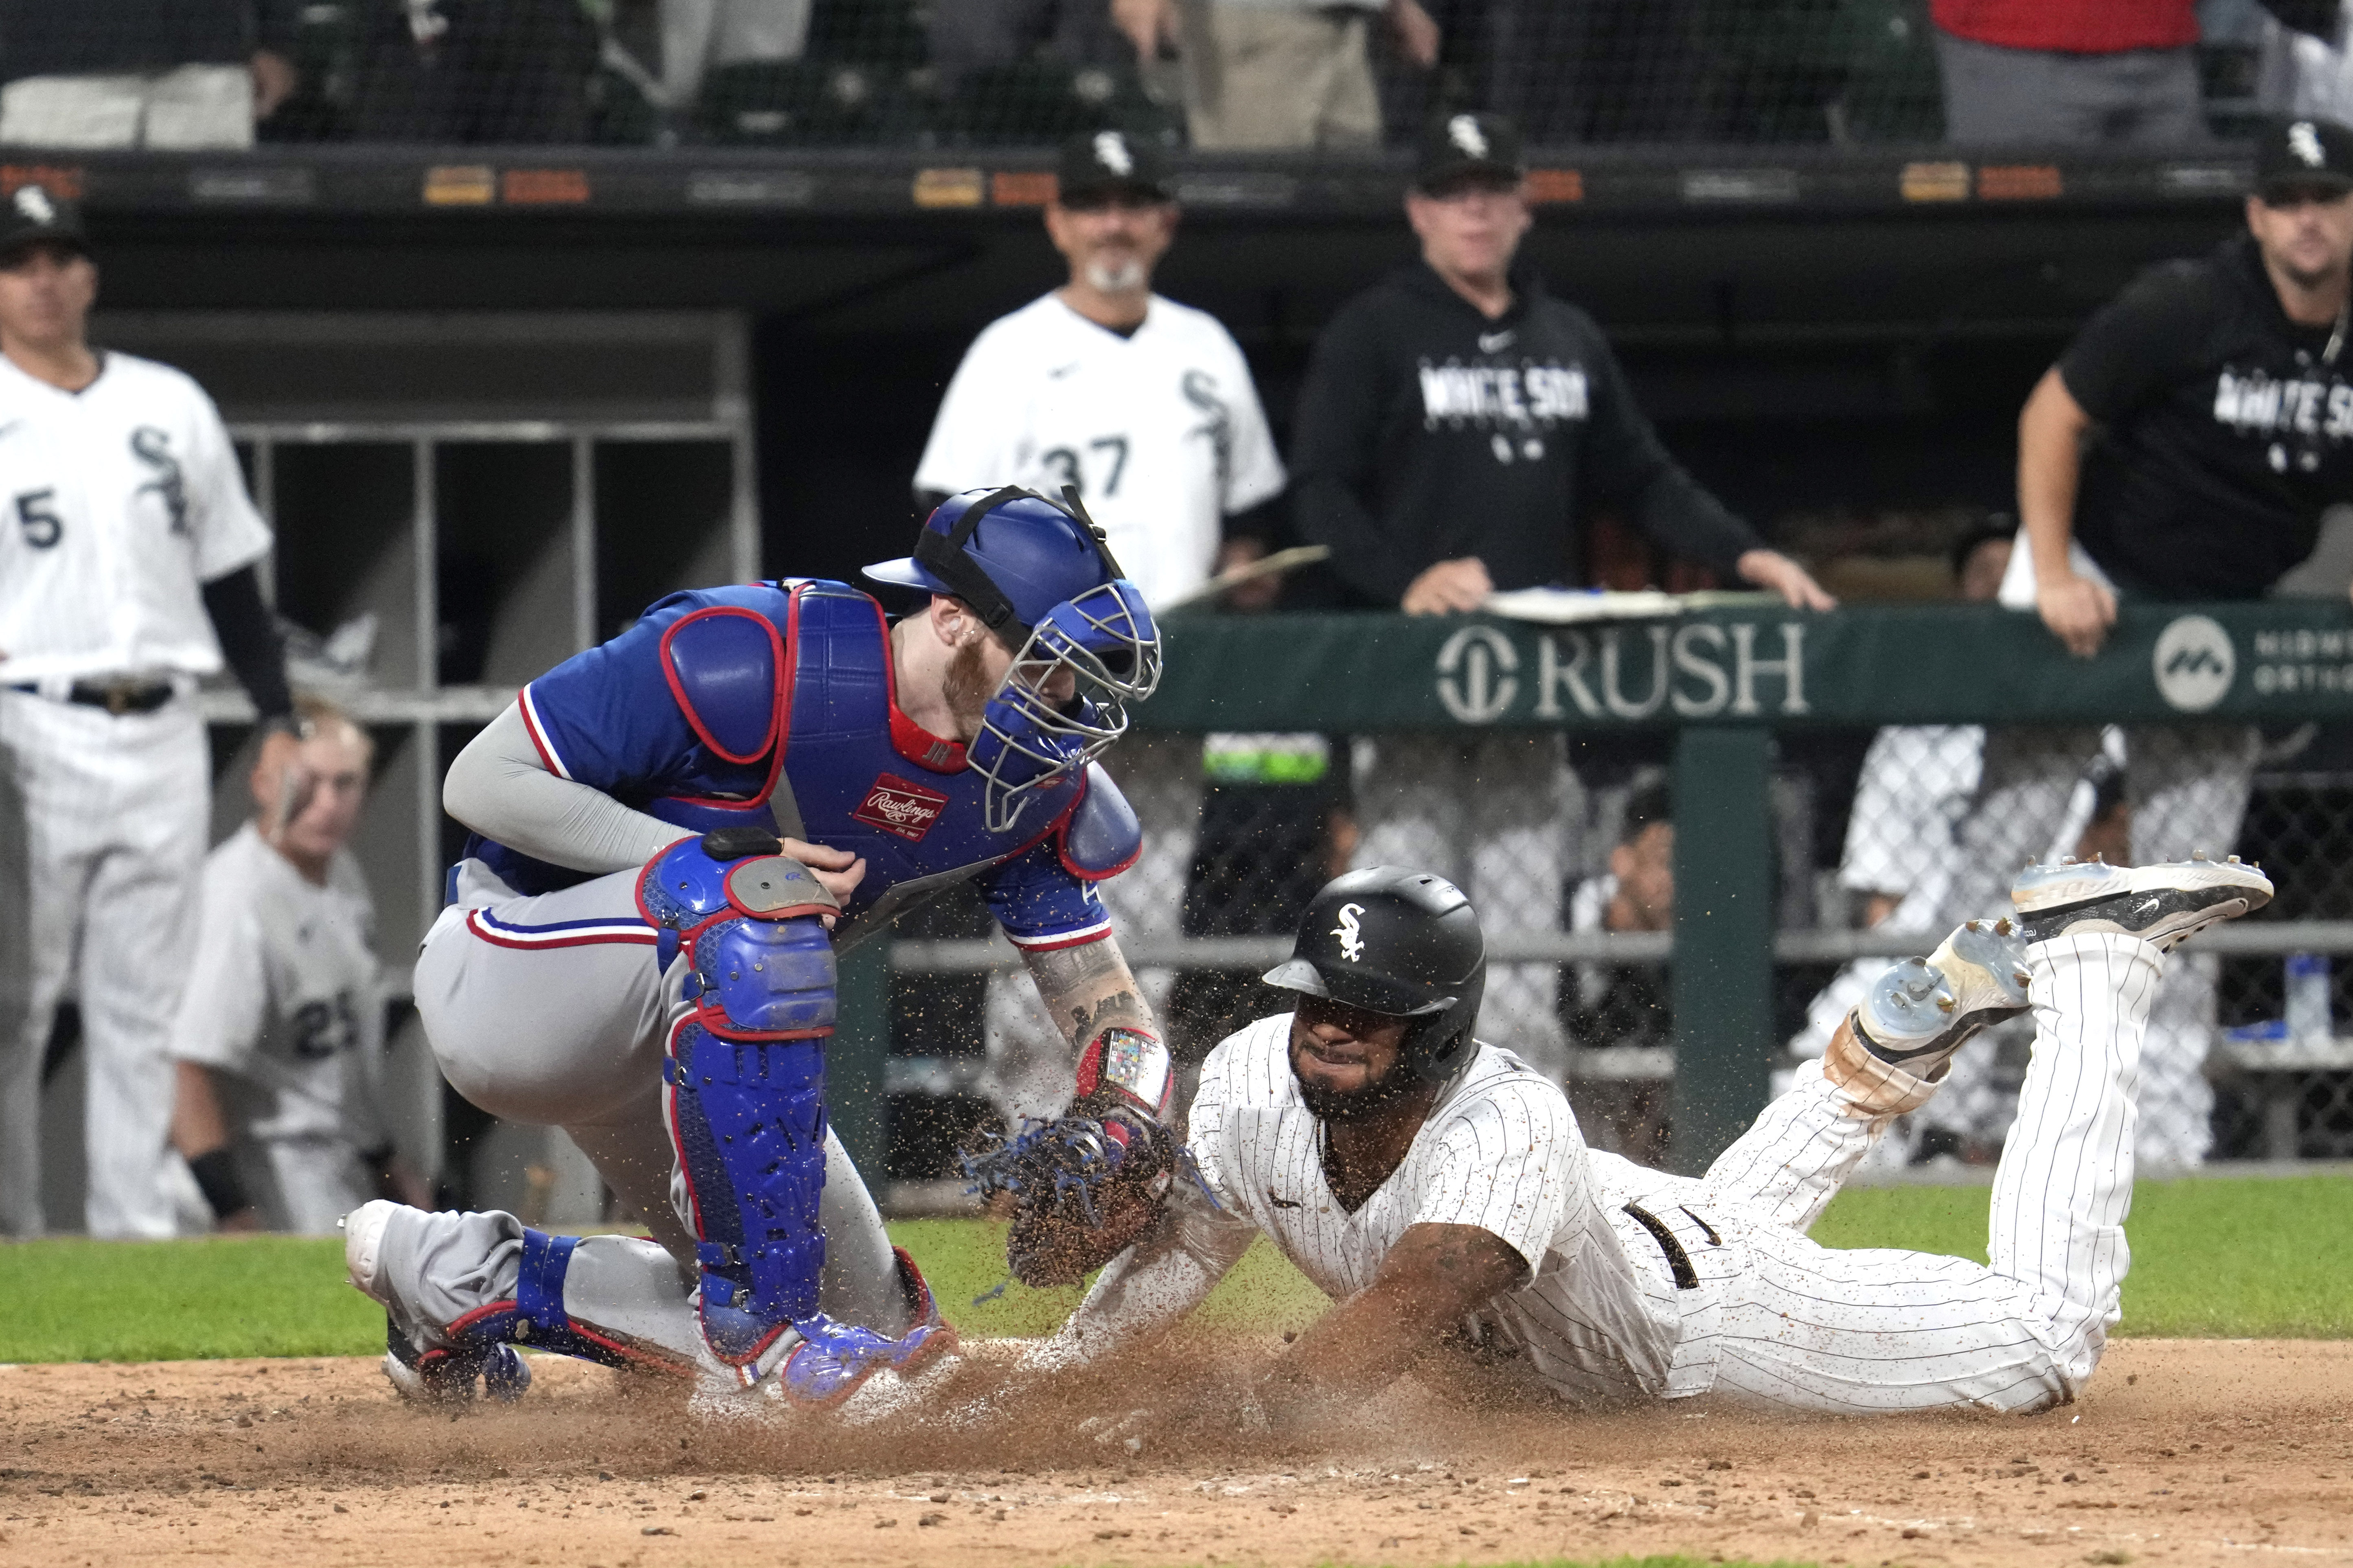 White Sox rally with 3 runs in the 8th inning to beat the Rangers